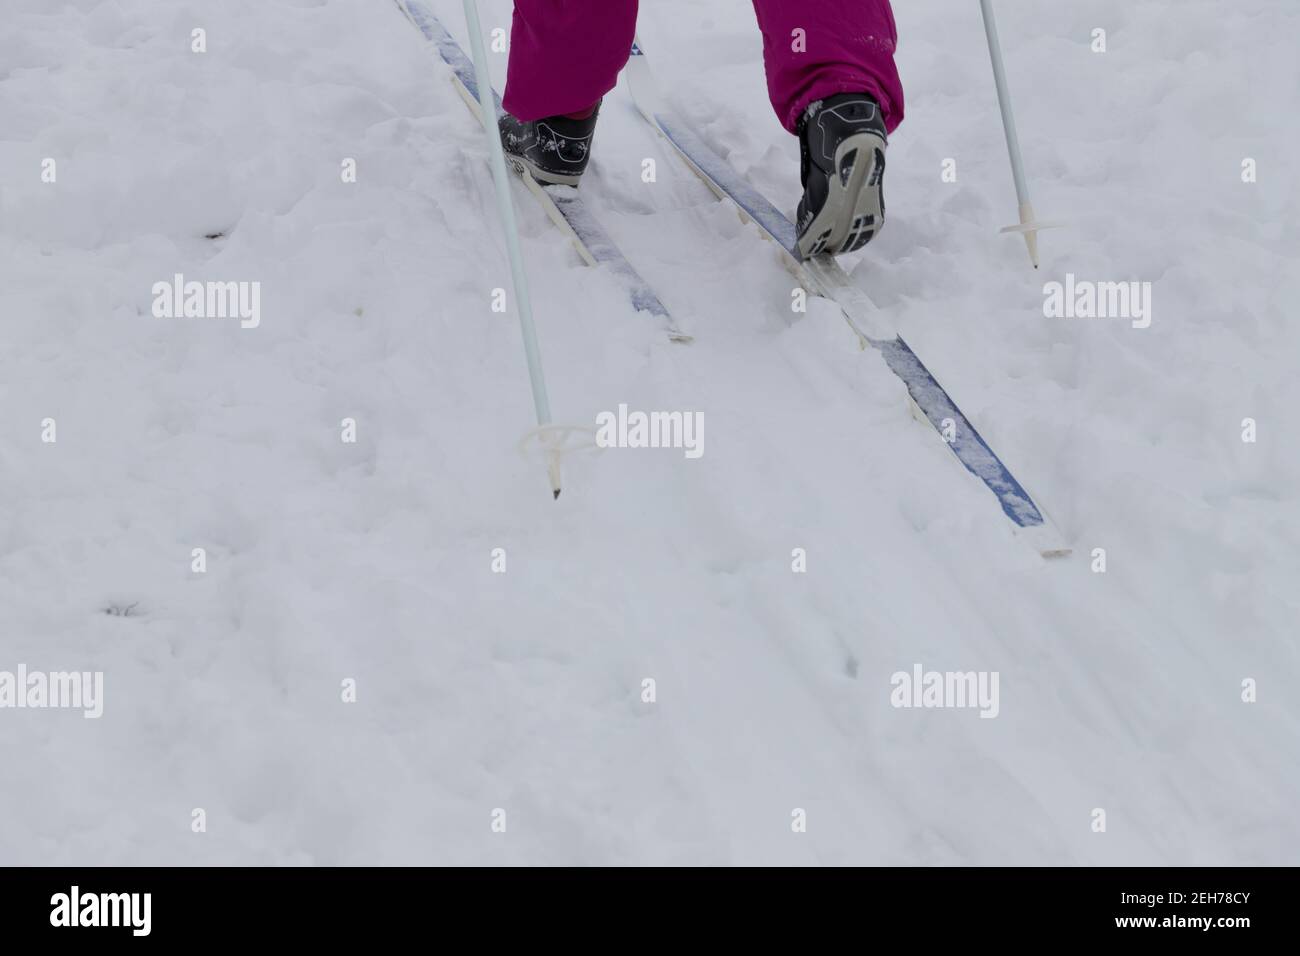 close-up of the feed with cross-country skiing in the snow from behind Stock Photo